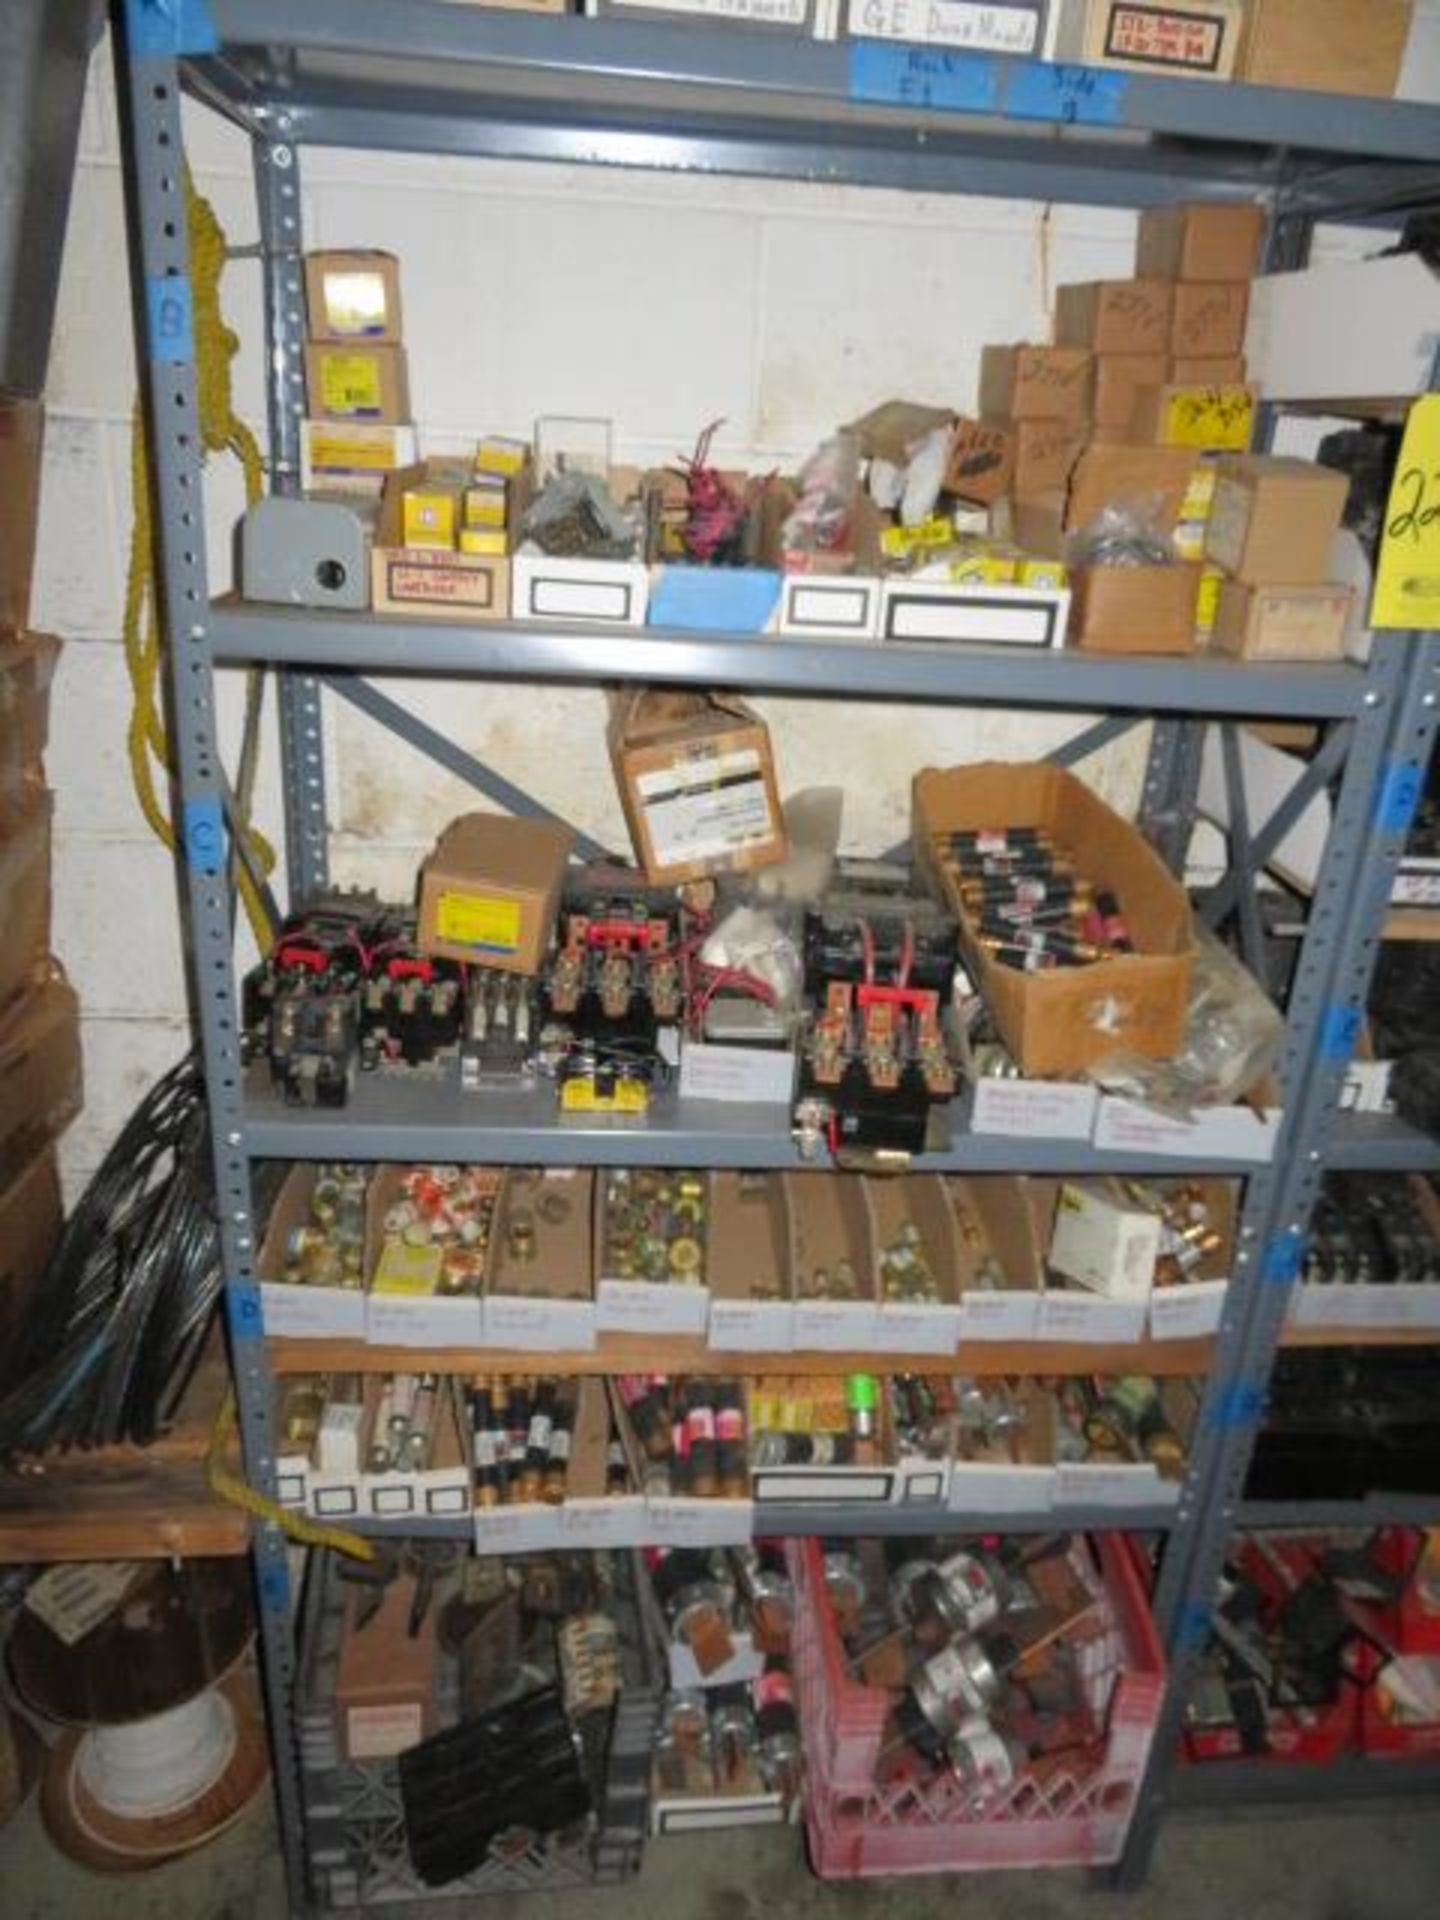 (4) SECTIONS ASSORTED CIRCUIT BREAKERS TO 200 AMP - Image 7 of 7